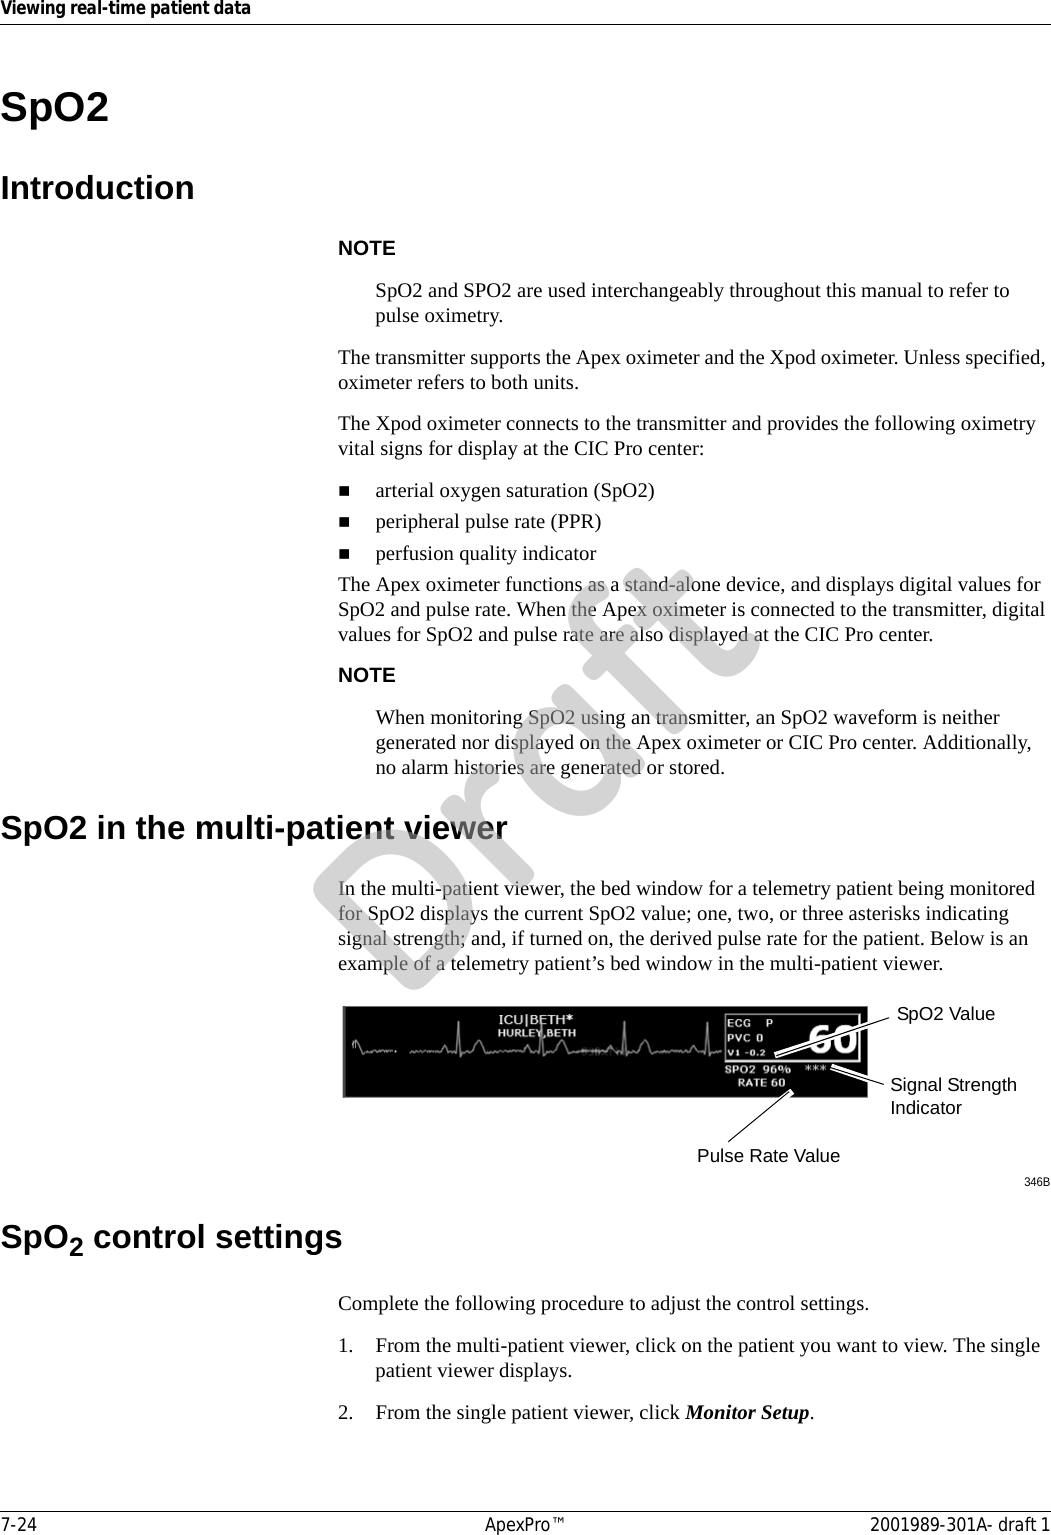 7-24 ApexPro™ 2001989-301A- draft 1Viewing real-time patient dataSpO2 IntroductionNOTESpO2 and SPO2 are used interchangeably throughout this manual to refer to pulse oximetry.The transmitter supports the Apex oximeter and the Xpod oximeter. Unless specified, oximeter refers to both units.The Xpod oximeter connects to the transmitter and provides the following oximetry vital signs for display at the CIC Pro center:arterial oxygen saturation (SpO2)peripheral pulse rate (PPR)perfusion quality indicatorThe Apex oximeter functions as a stand-alone device, and displays digital values for SpO2 and pulse rate. When the Apex oximeter is connected to the transmitter, digital values for SpO2 and pulse rate are also displayed at the CIC Pro center.NOTEWhen monitoring SpO2 using an transmitter, an SpO2 waveform is neither generated nor displayed on the Apex oximeter or CIC Pro center. Additionally, no alarm histories are generated or stored.SpO2 in the multi-patient viewerIn the multi-patient viewer, the bed window for a telemetry patient being monitored for SpO2 displays the current SpO2 value; one, two, or three asterisks indicating signal strength; and, if turned on, the derived pulse rate for the patient. Below is an example of a telemetry patient’s bed window in the multi-patient viewer.346BSpO2 control settingsComplete the following procedure to adjust the control settings.1. From the multi-patient viewer, click on the patient you want to view. The single patient viewer displays.2. From the single patient viewer, click Monitor Setup.Signal Strength IndicatorSpO2 ValuePulse Rate ValueDraft